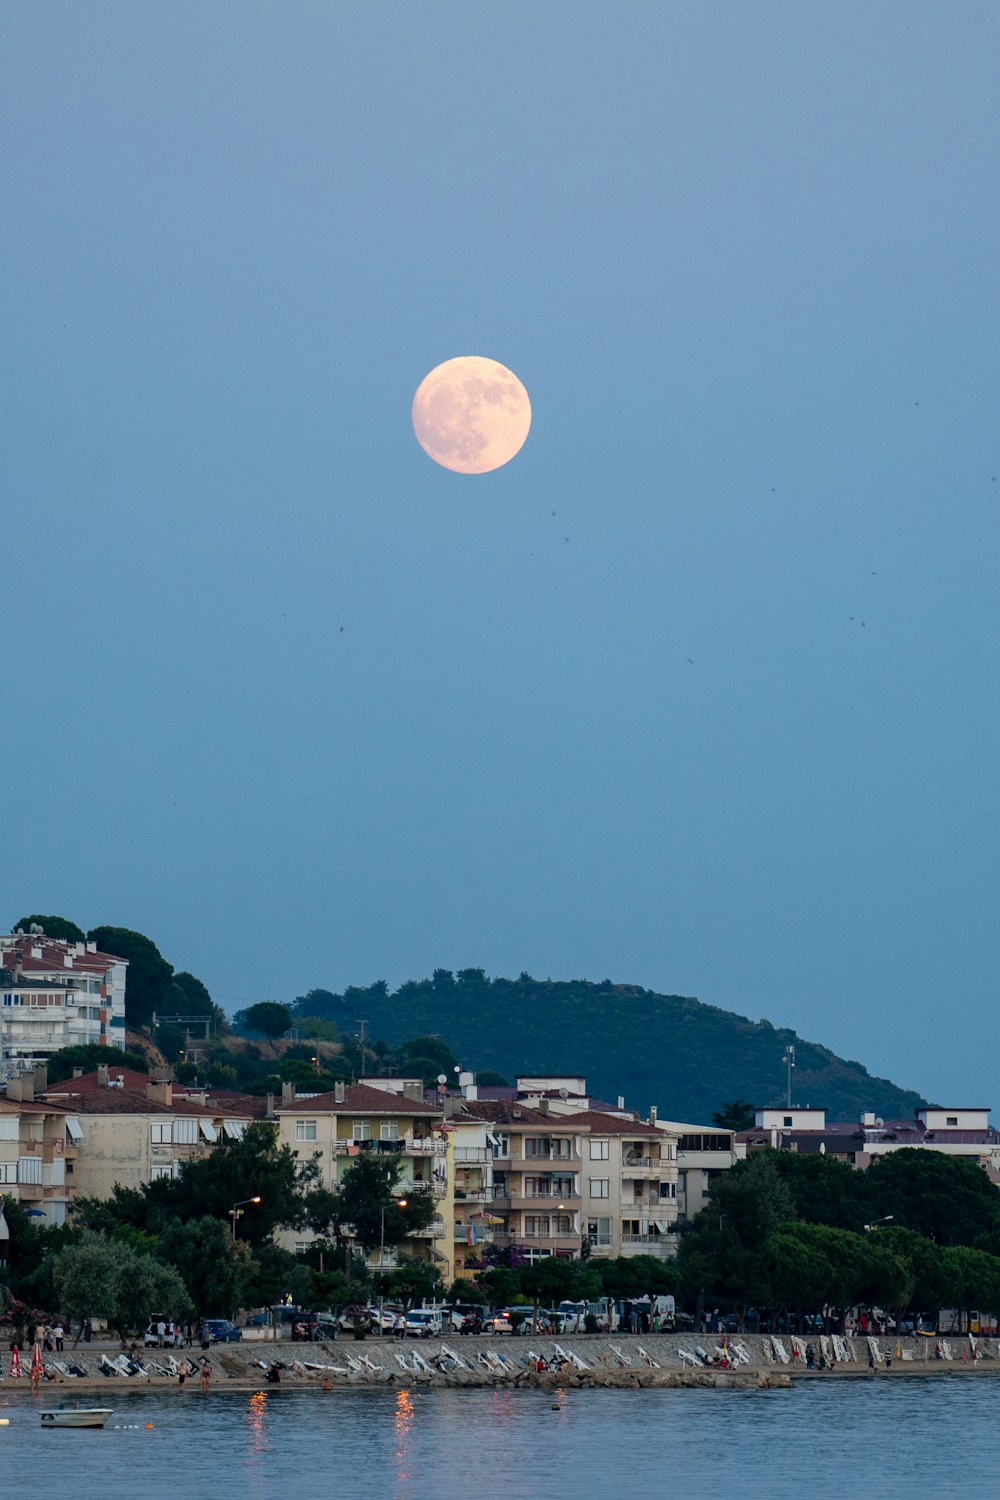 a full moon rising over a city on a hill